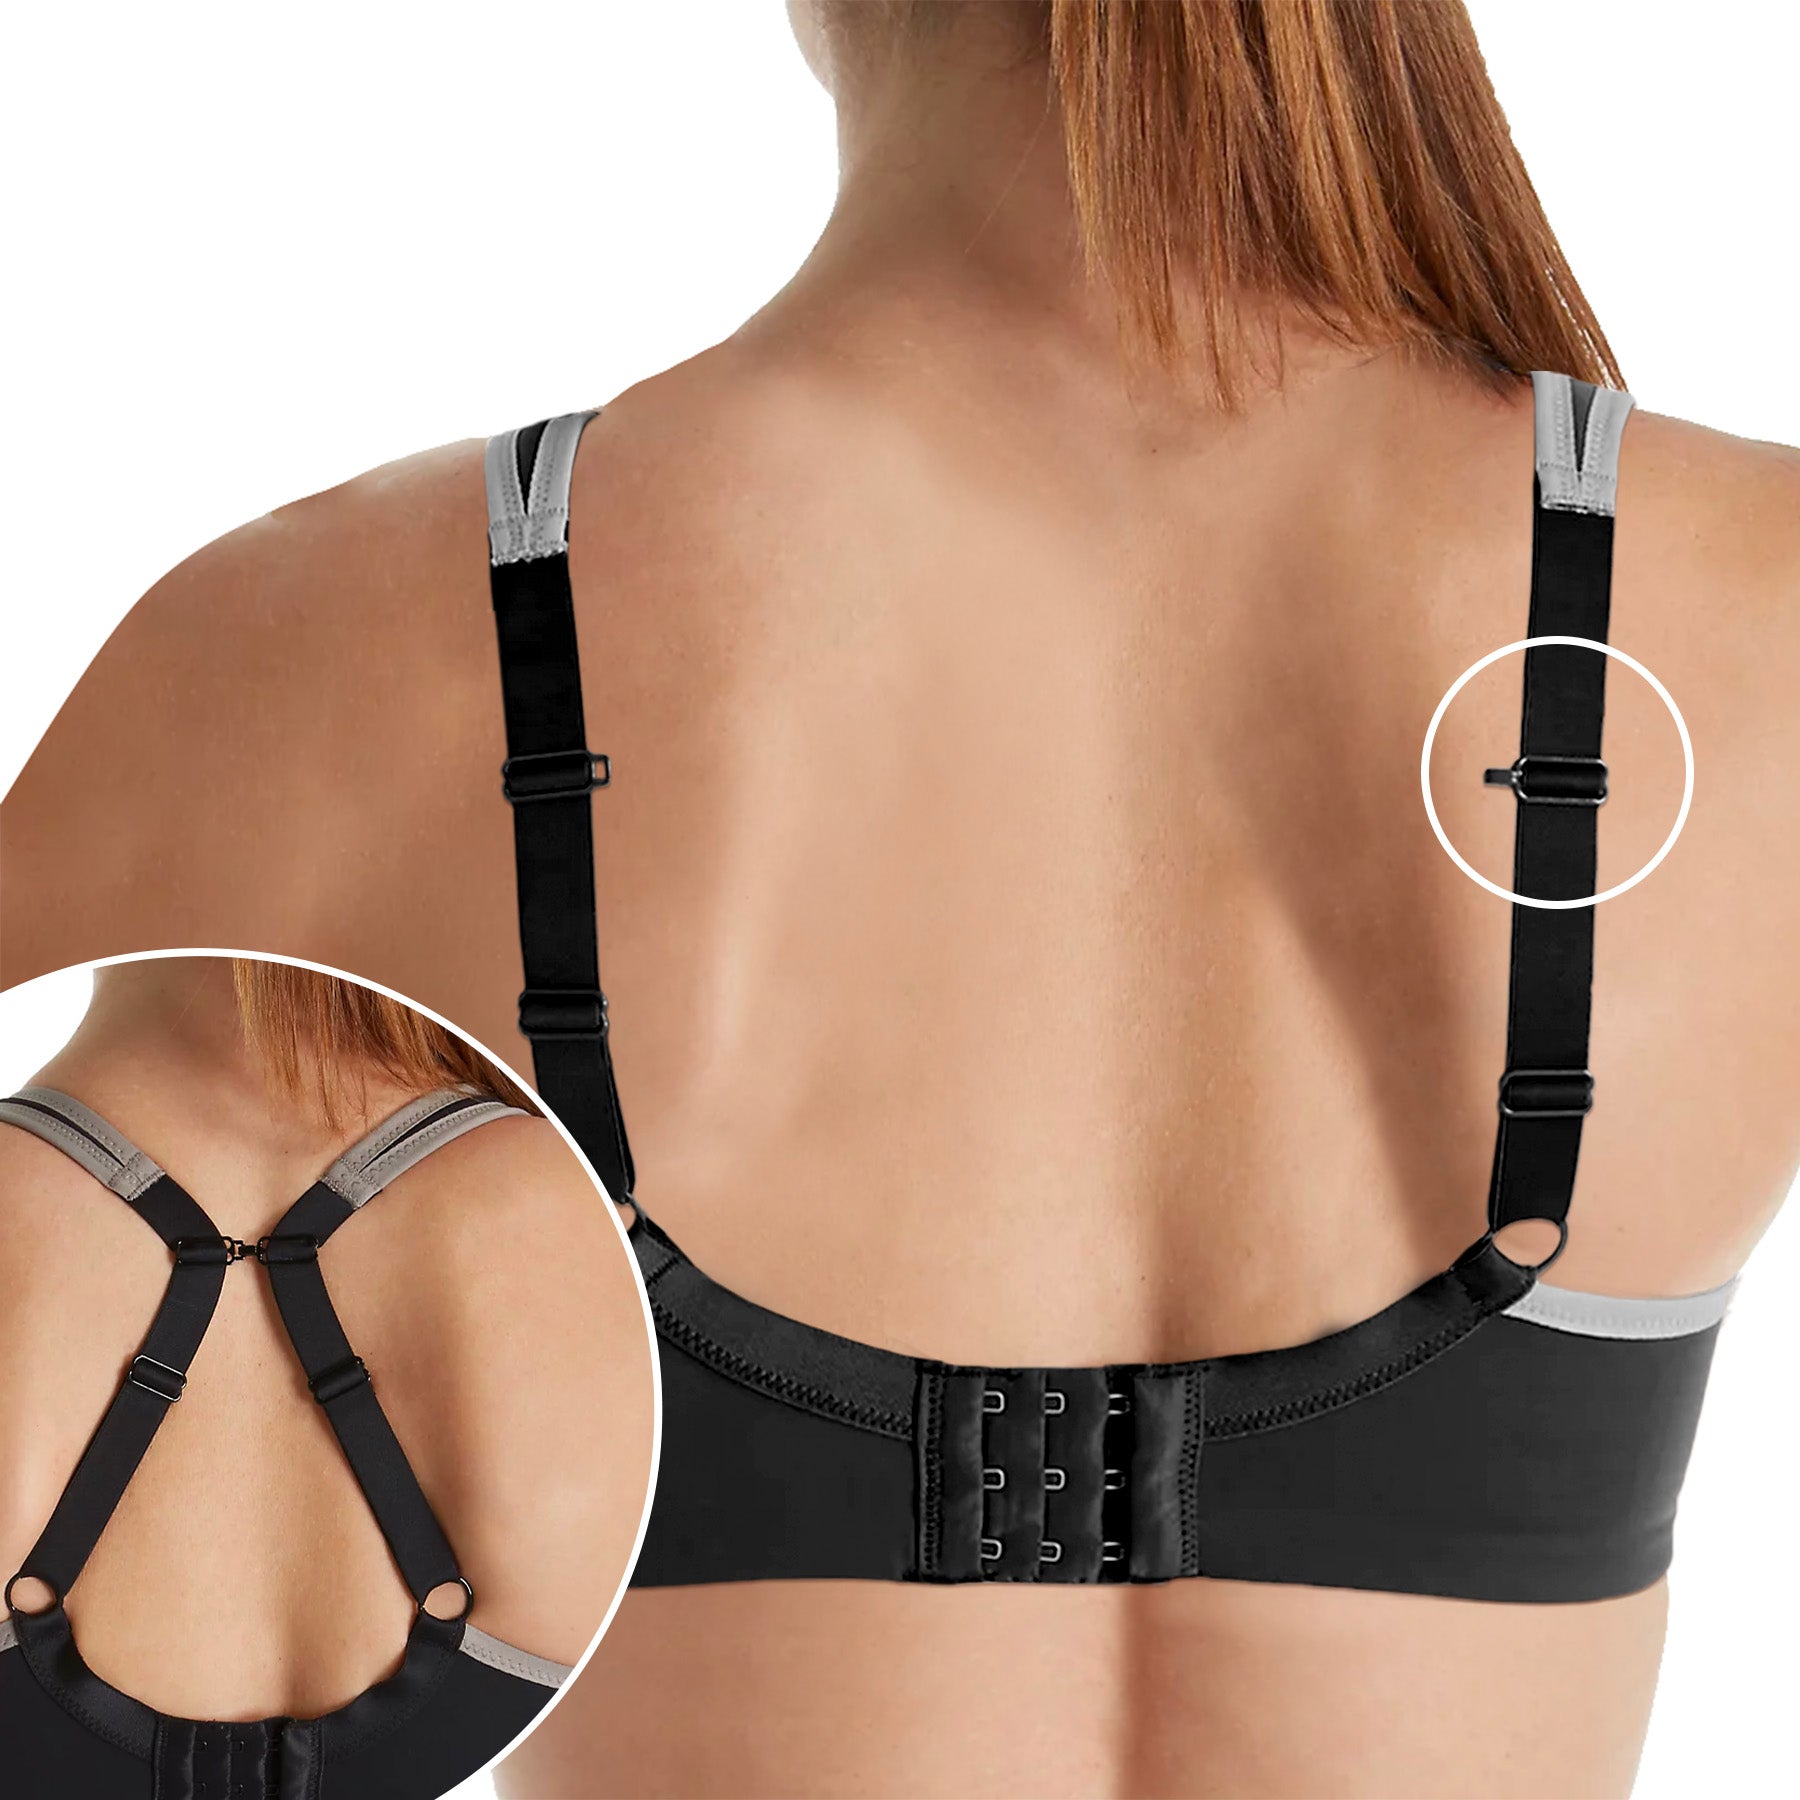 Fit Fully Yours Pauline Wire Sports Bra B9660 Black Gray Rear View